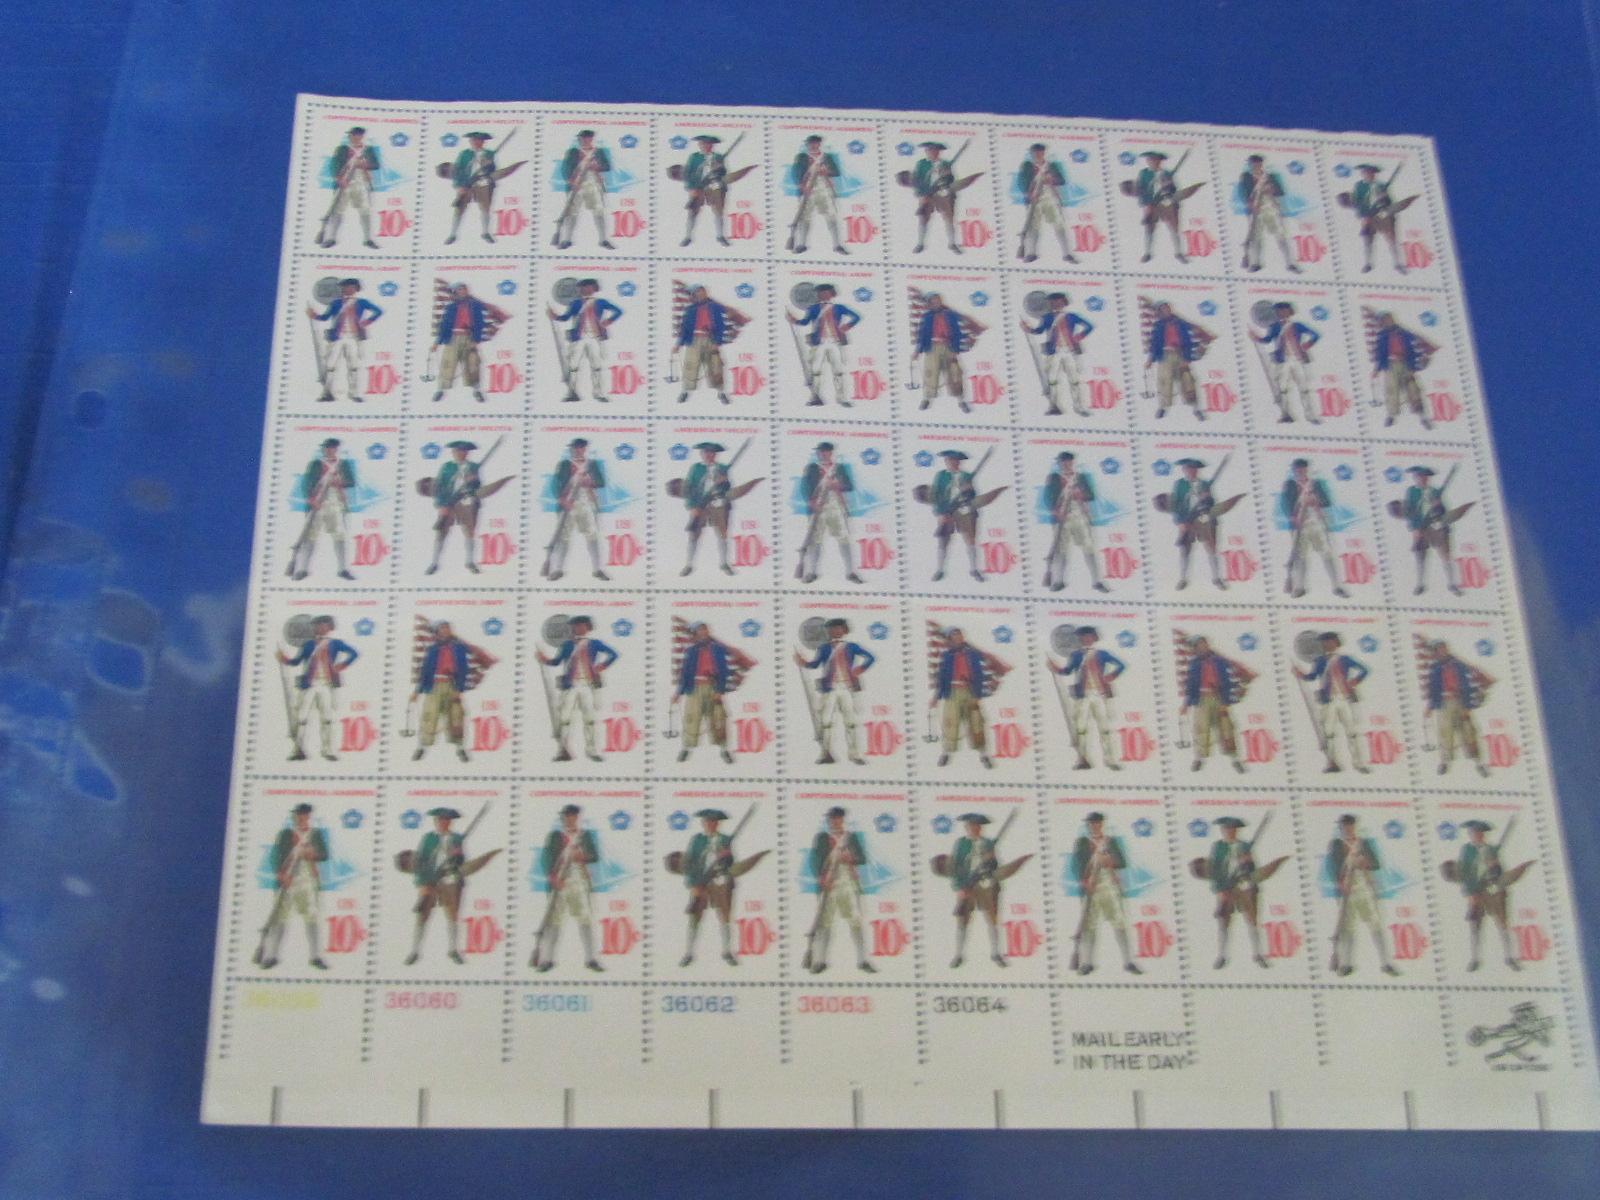 USA Postage 7 Sheets 1 8 cent LBJ, &10 c. Bicentennial, Military, Commerce Banking - $30.56 Value